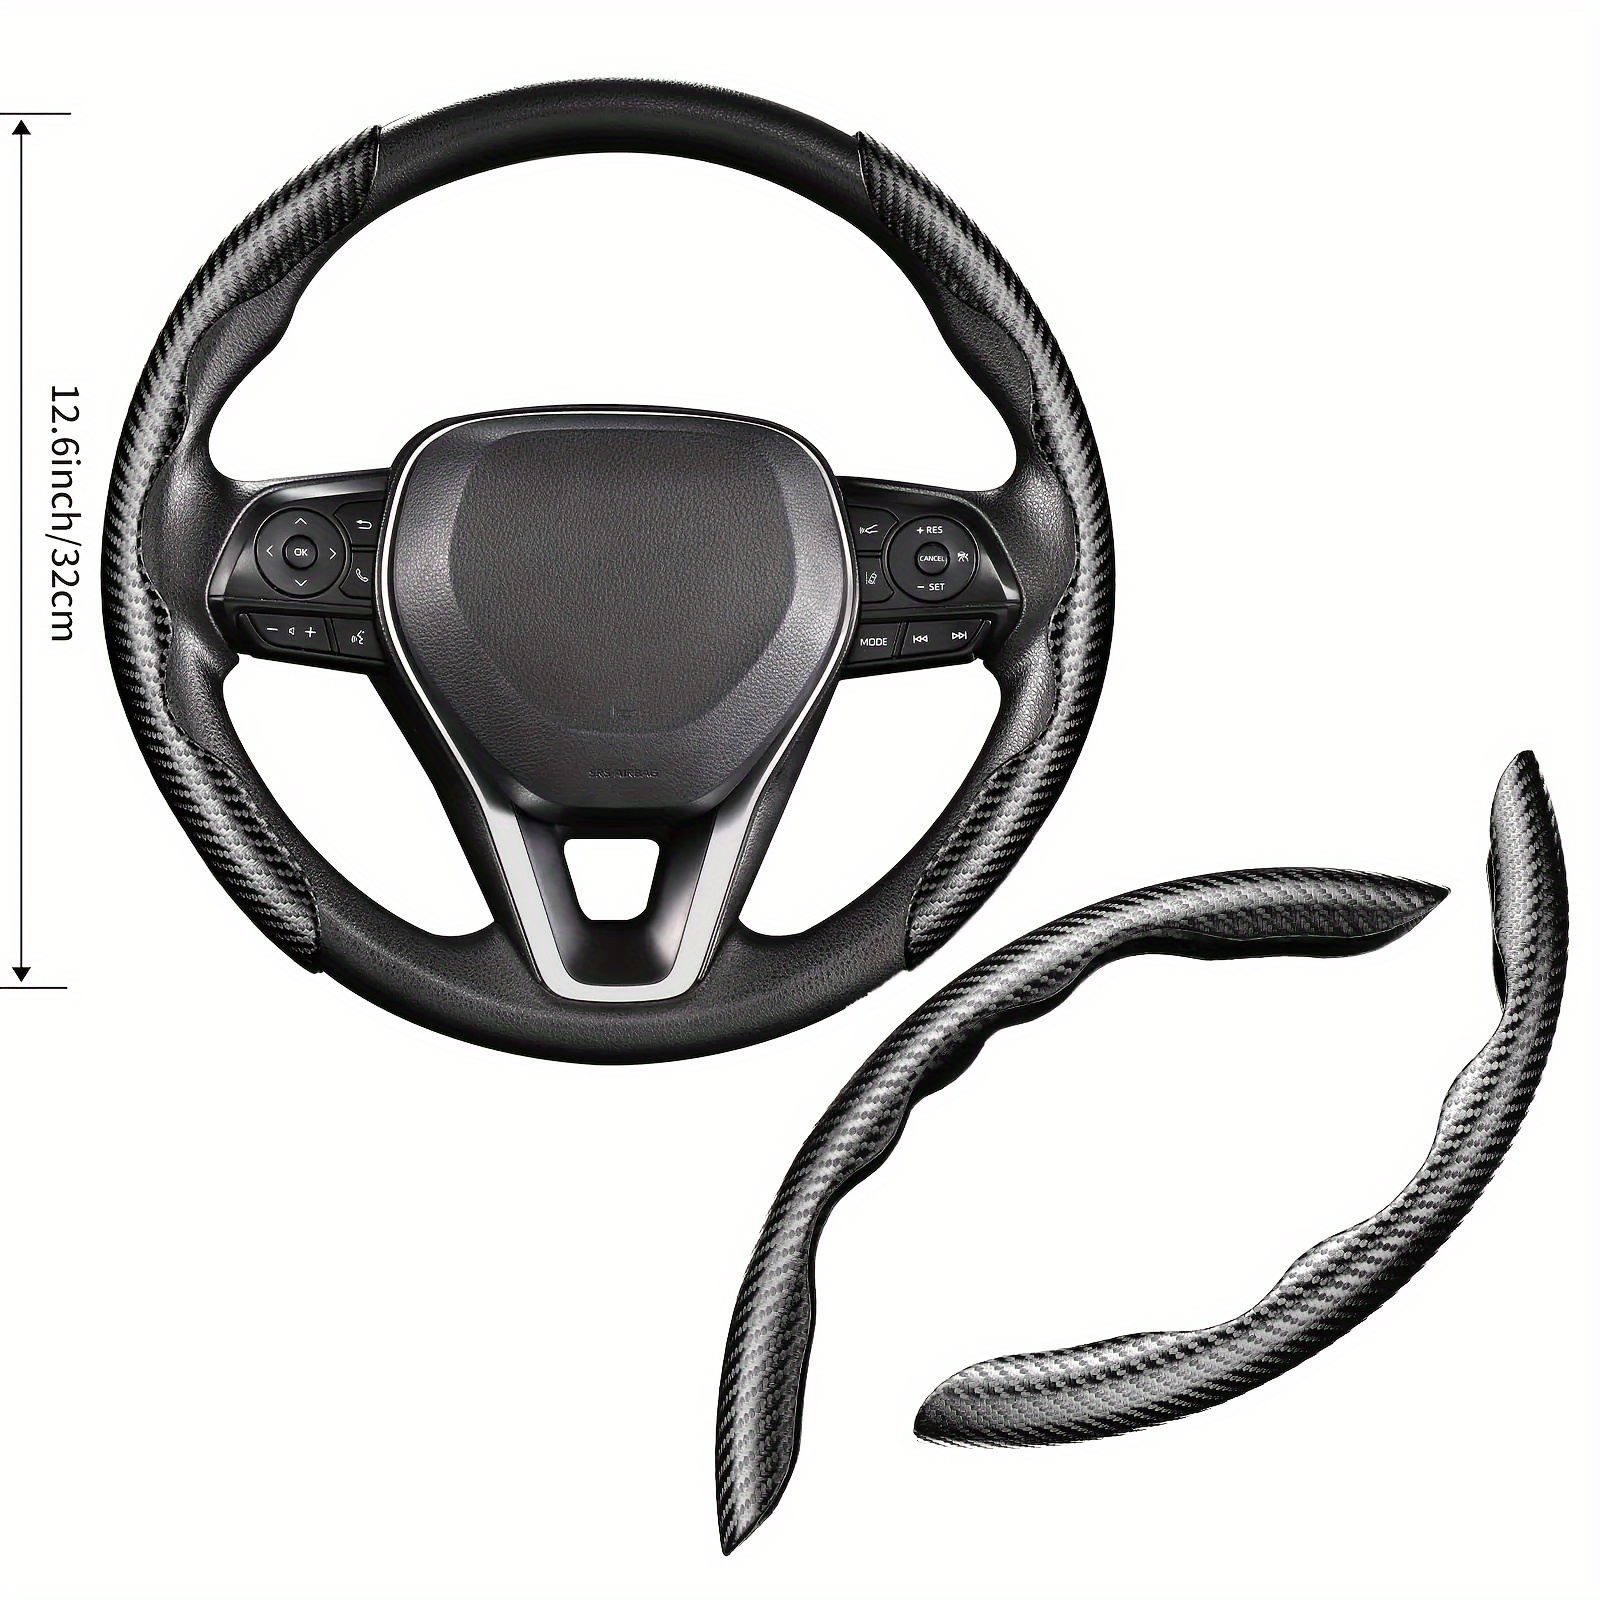 

Cartist Carbon Fiber Steering Wheel Cover For Men Sporty Wheel Protector, Anti-skid Soft Pu Leather Universal For 14 15 16 Inch Car Steering Wheel Cover